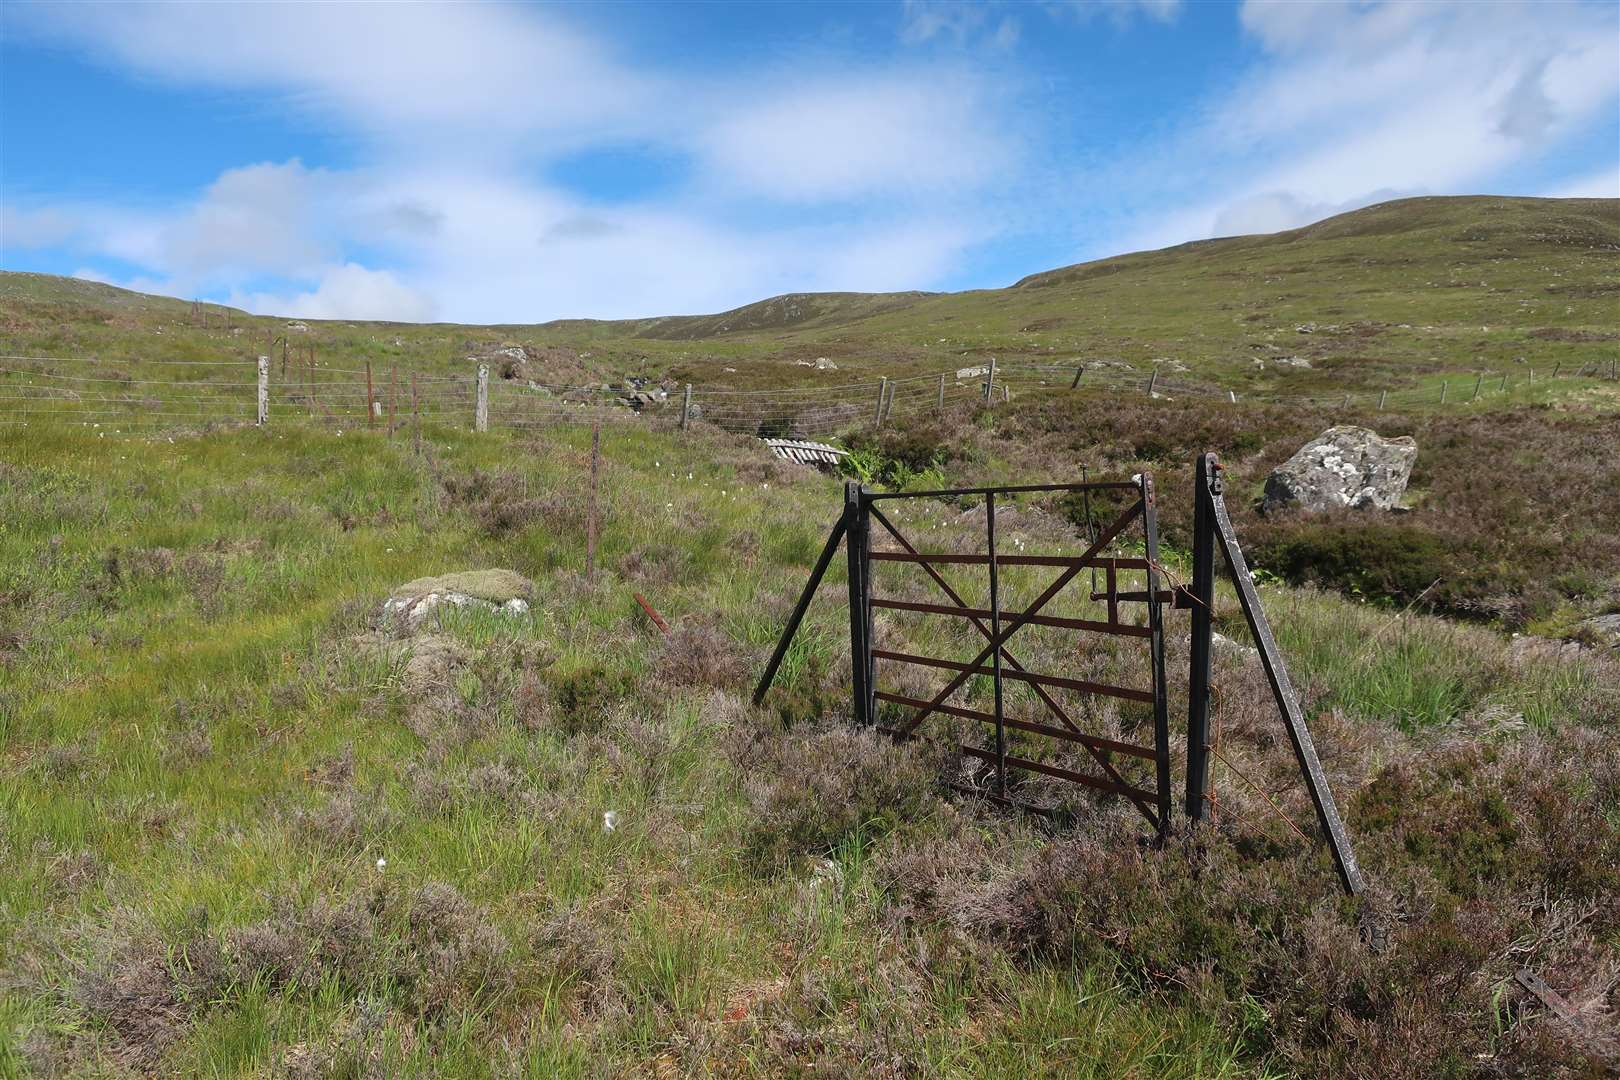 A gate on the old fenceline that runs right through the corrie and continues on the summit plateau of Gael Charn.